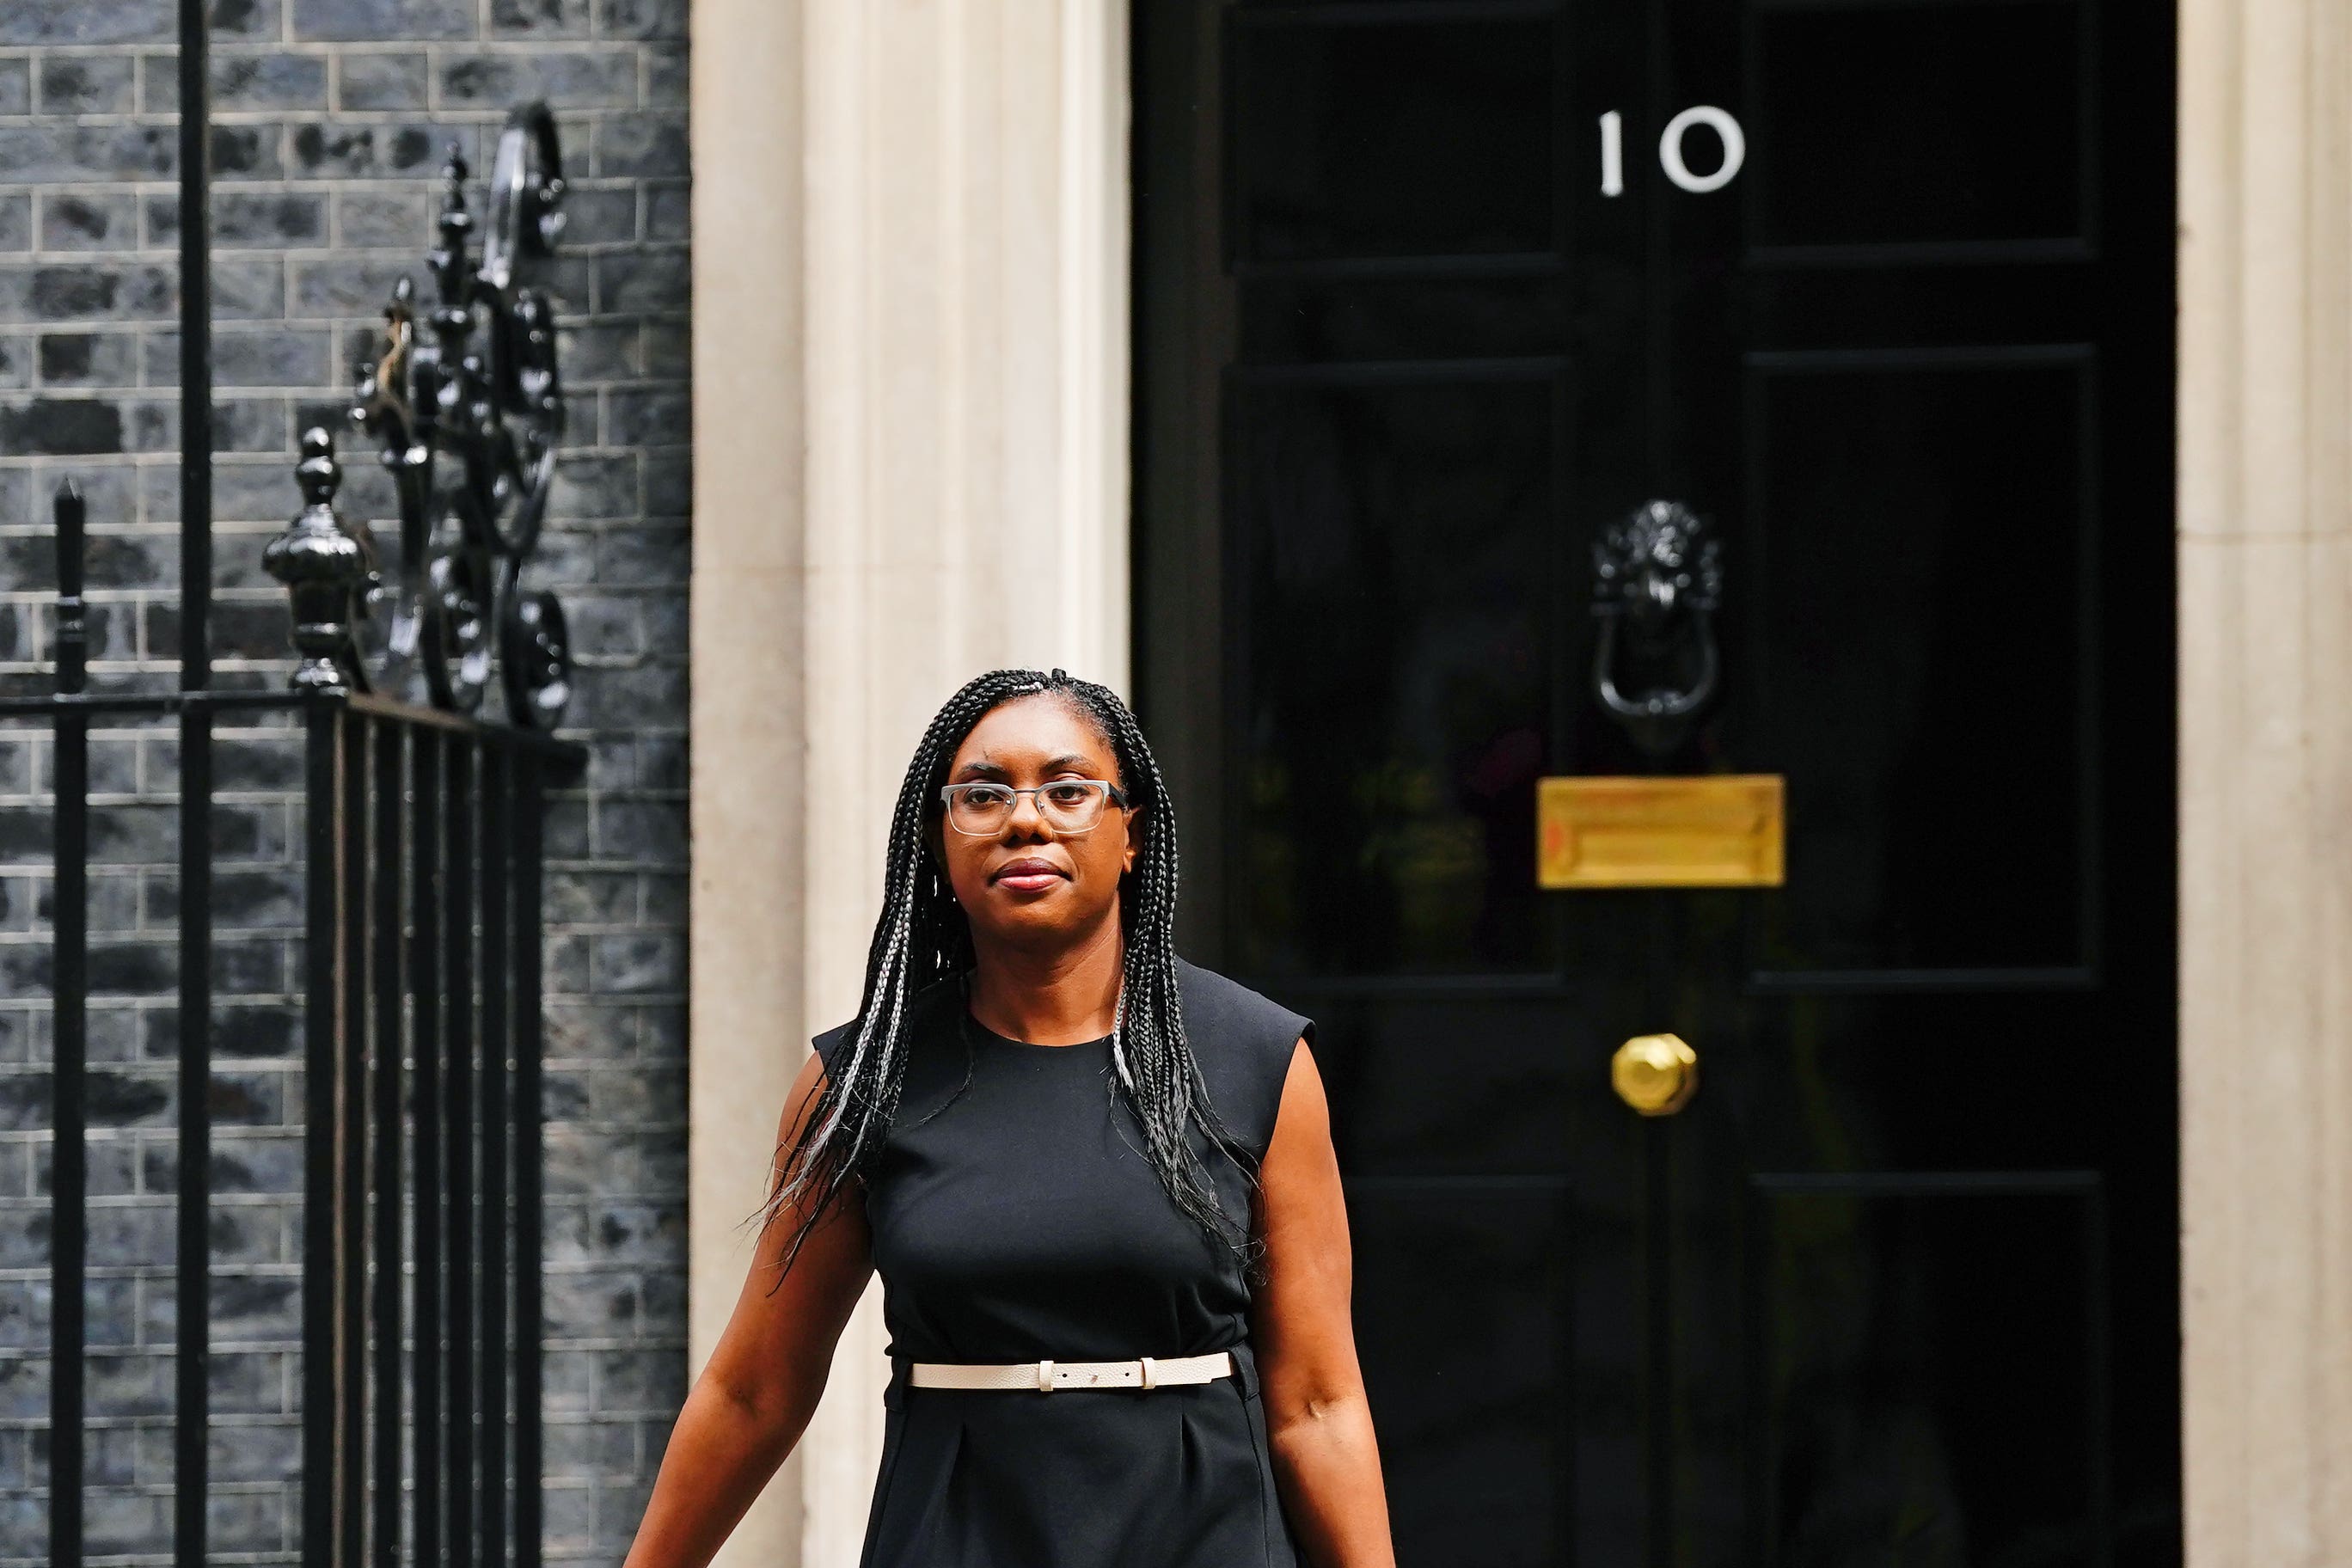 Kemi Badenoch, the business secretary, has an article in The Sun saying Brexit was a vote of confidence in the country